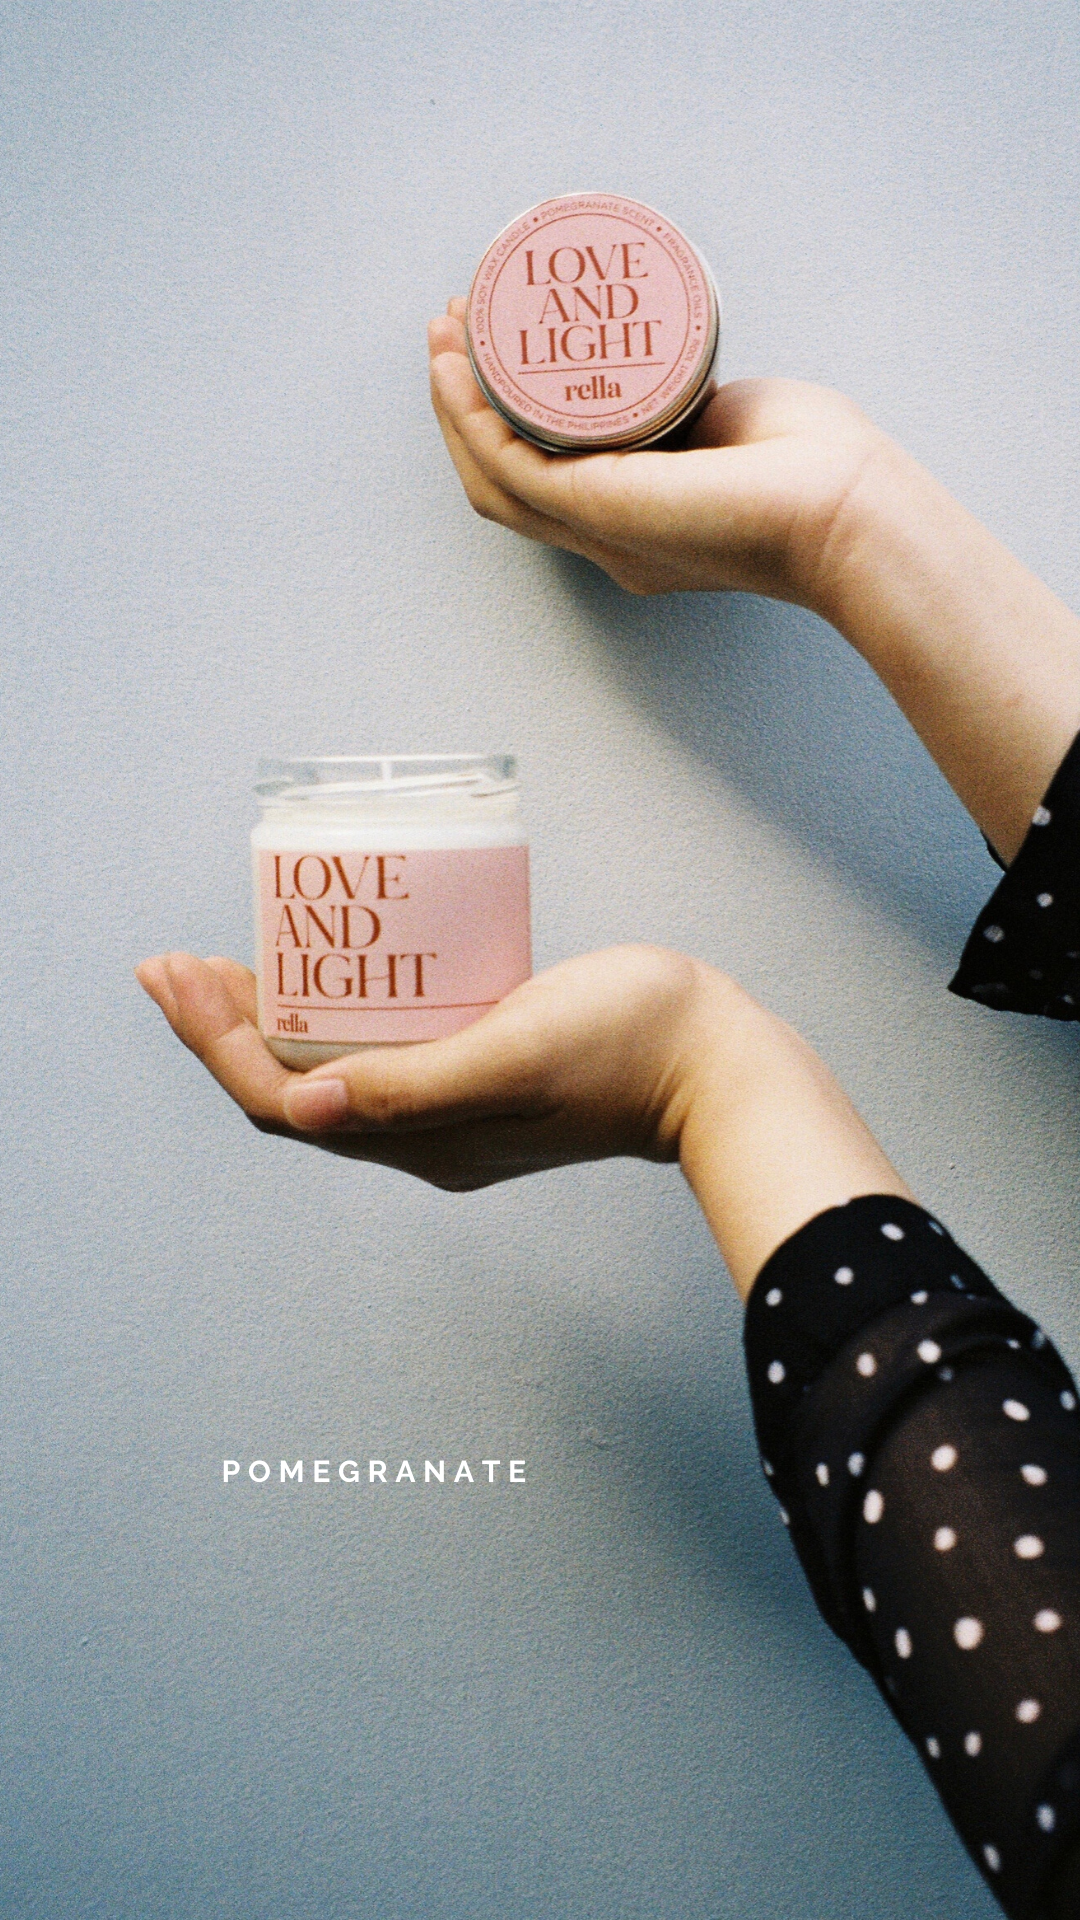 Love and Light: Pomegranate Scented Soy Wax Candle